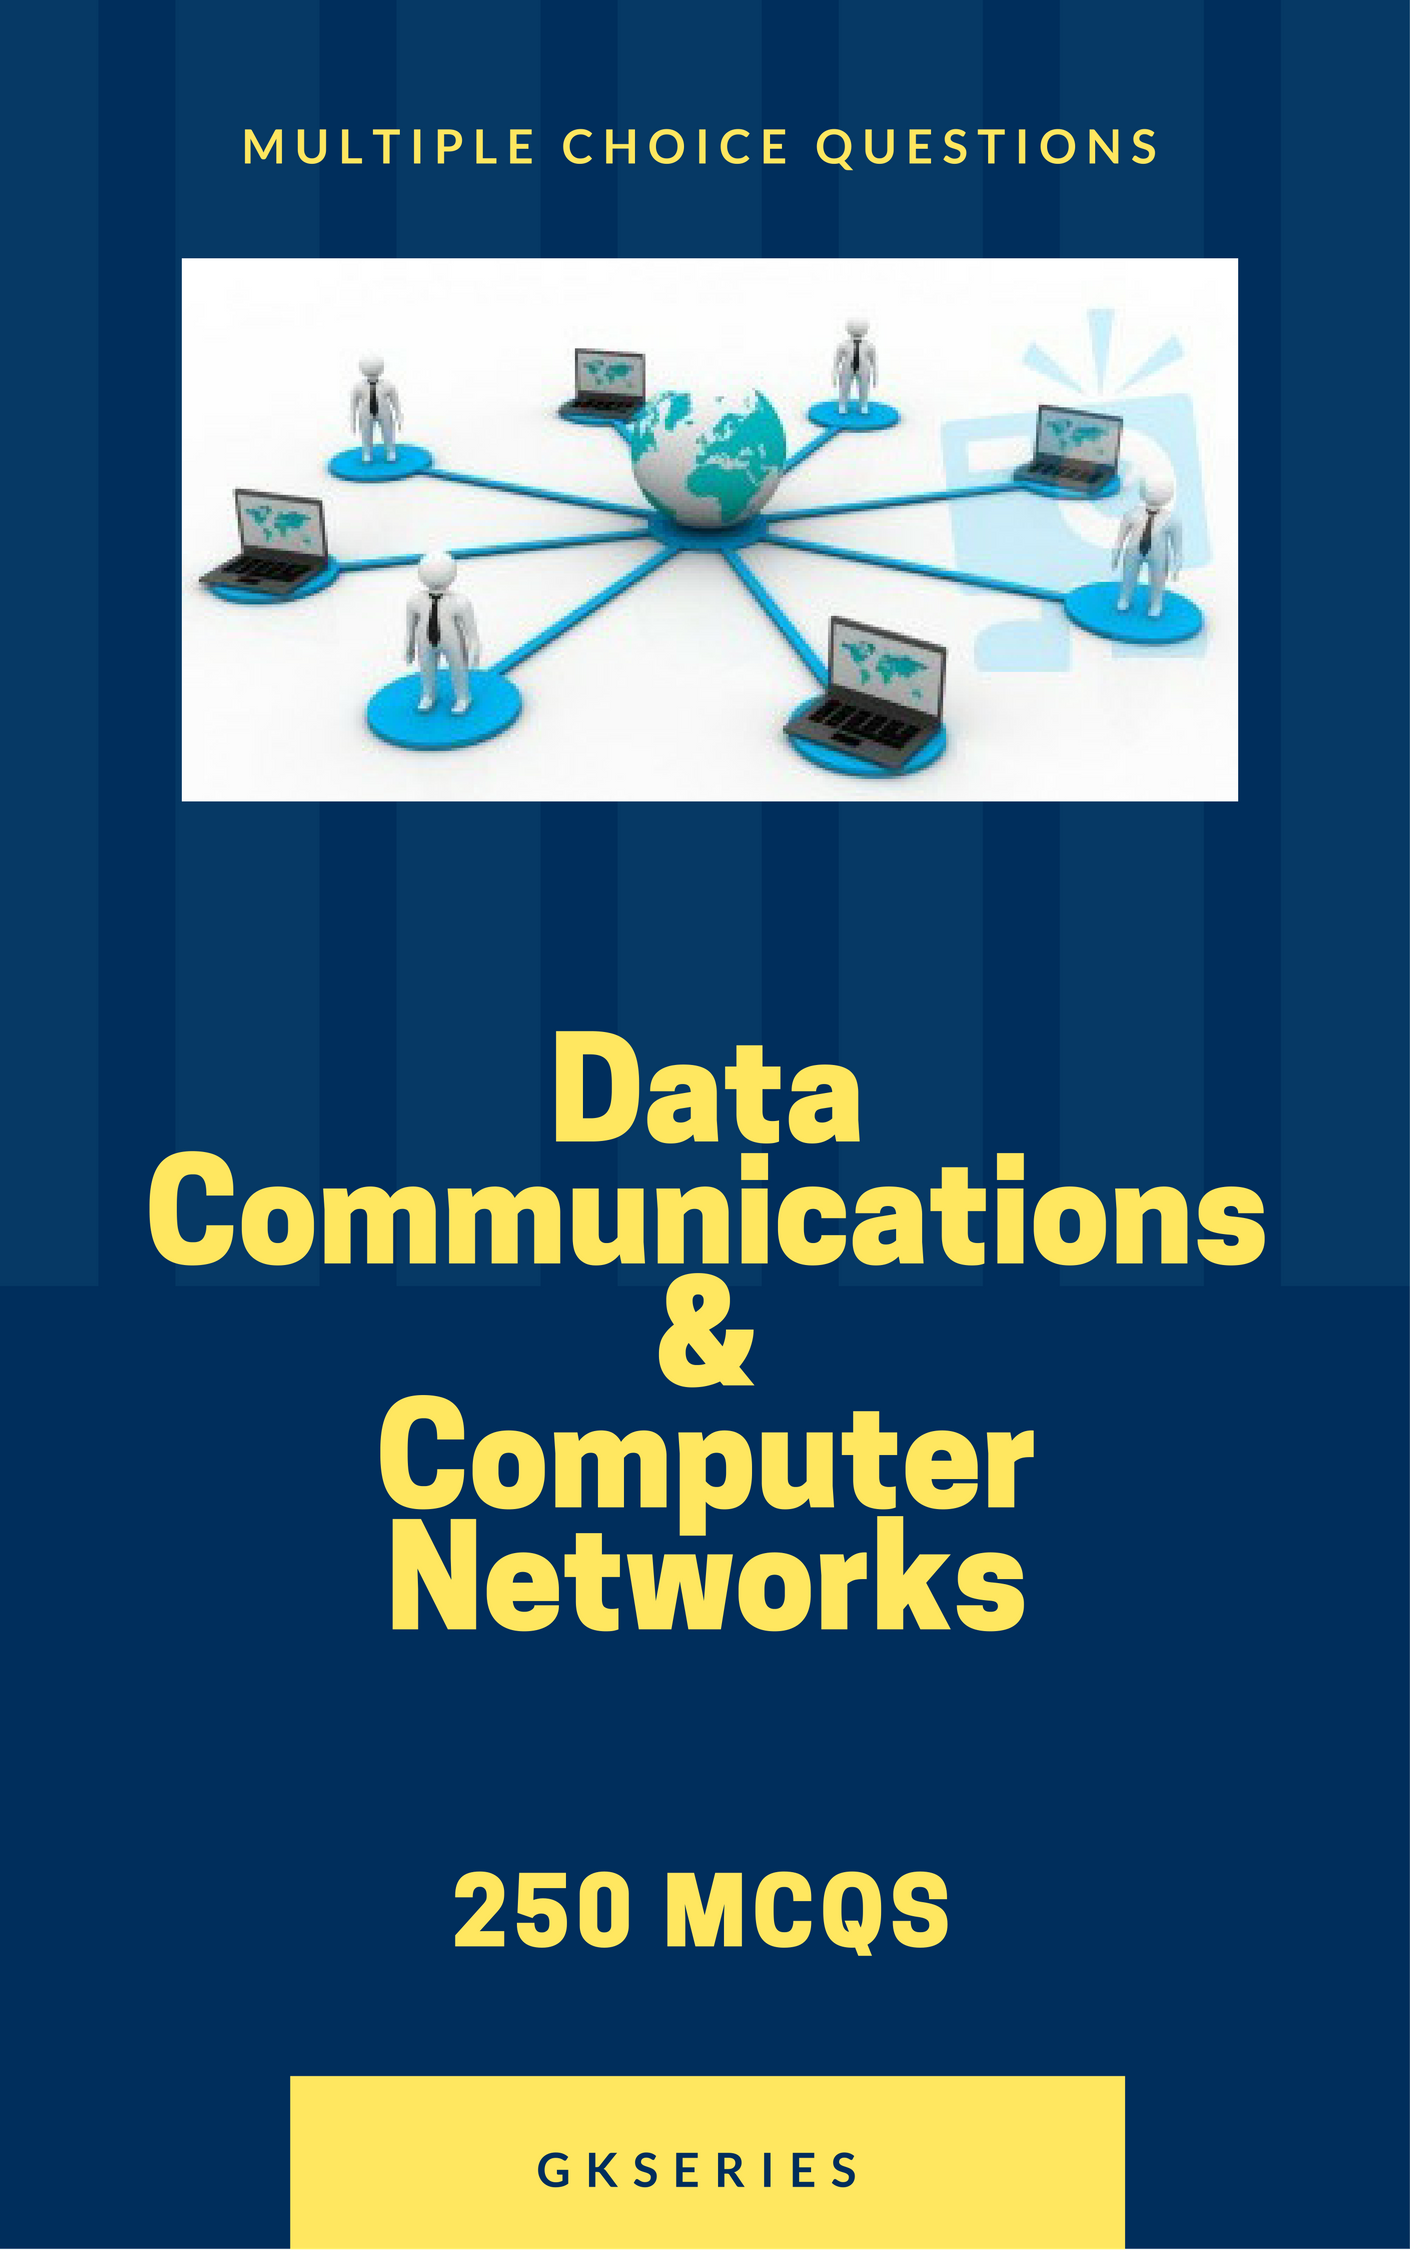 mcq questions on computer networks with answers pdf